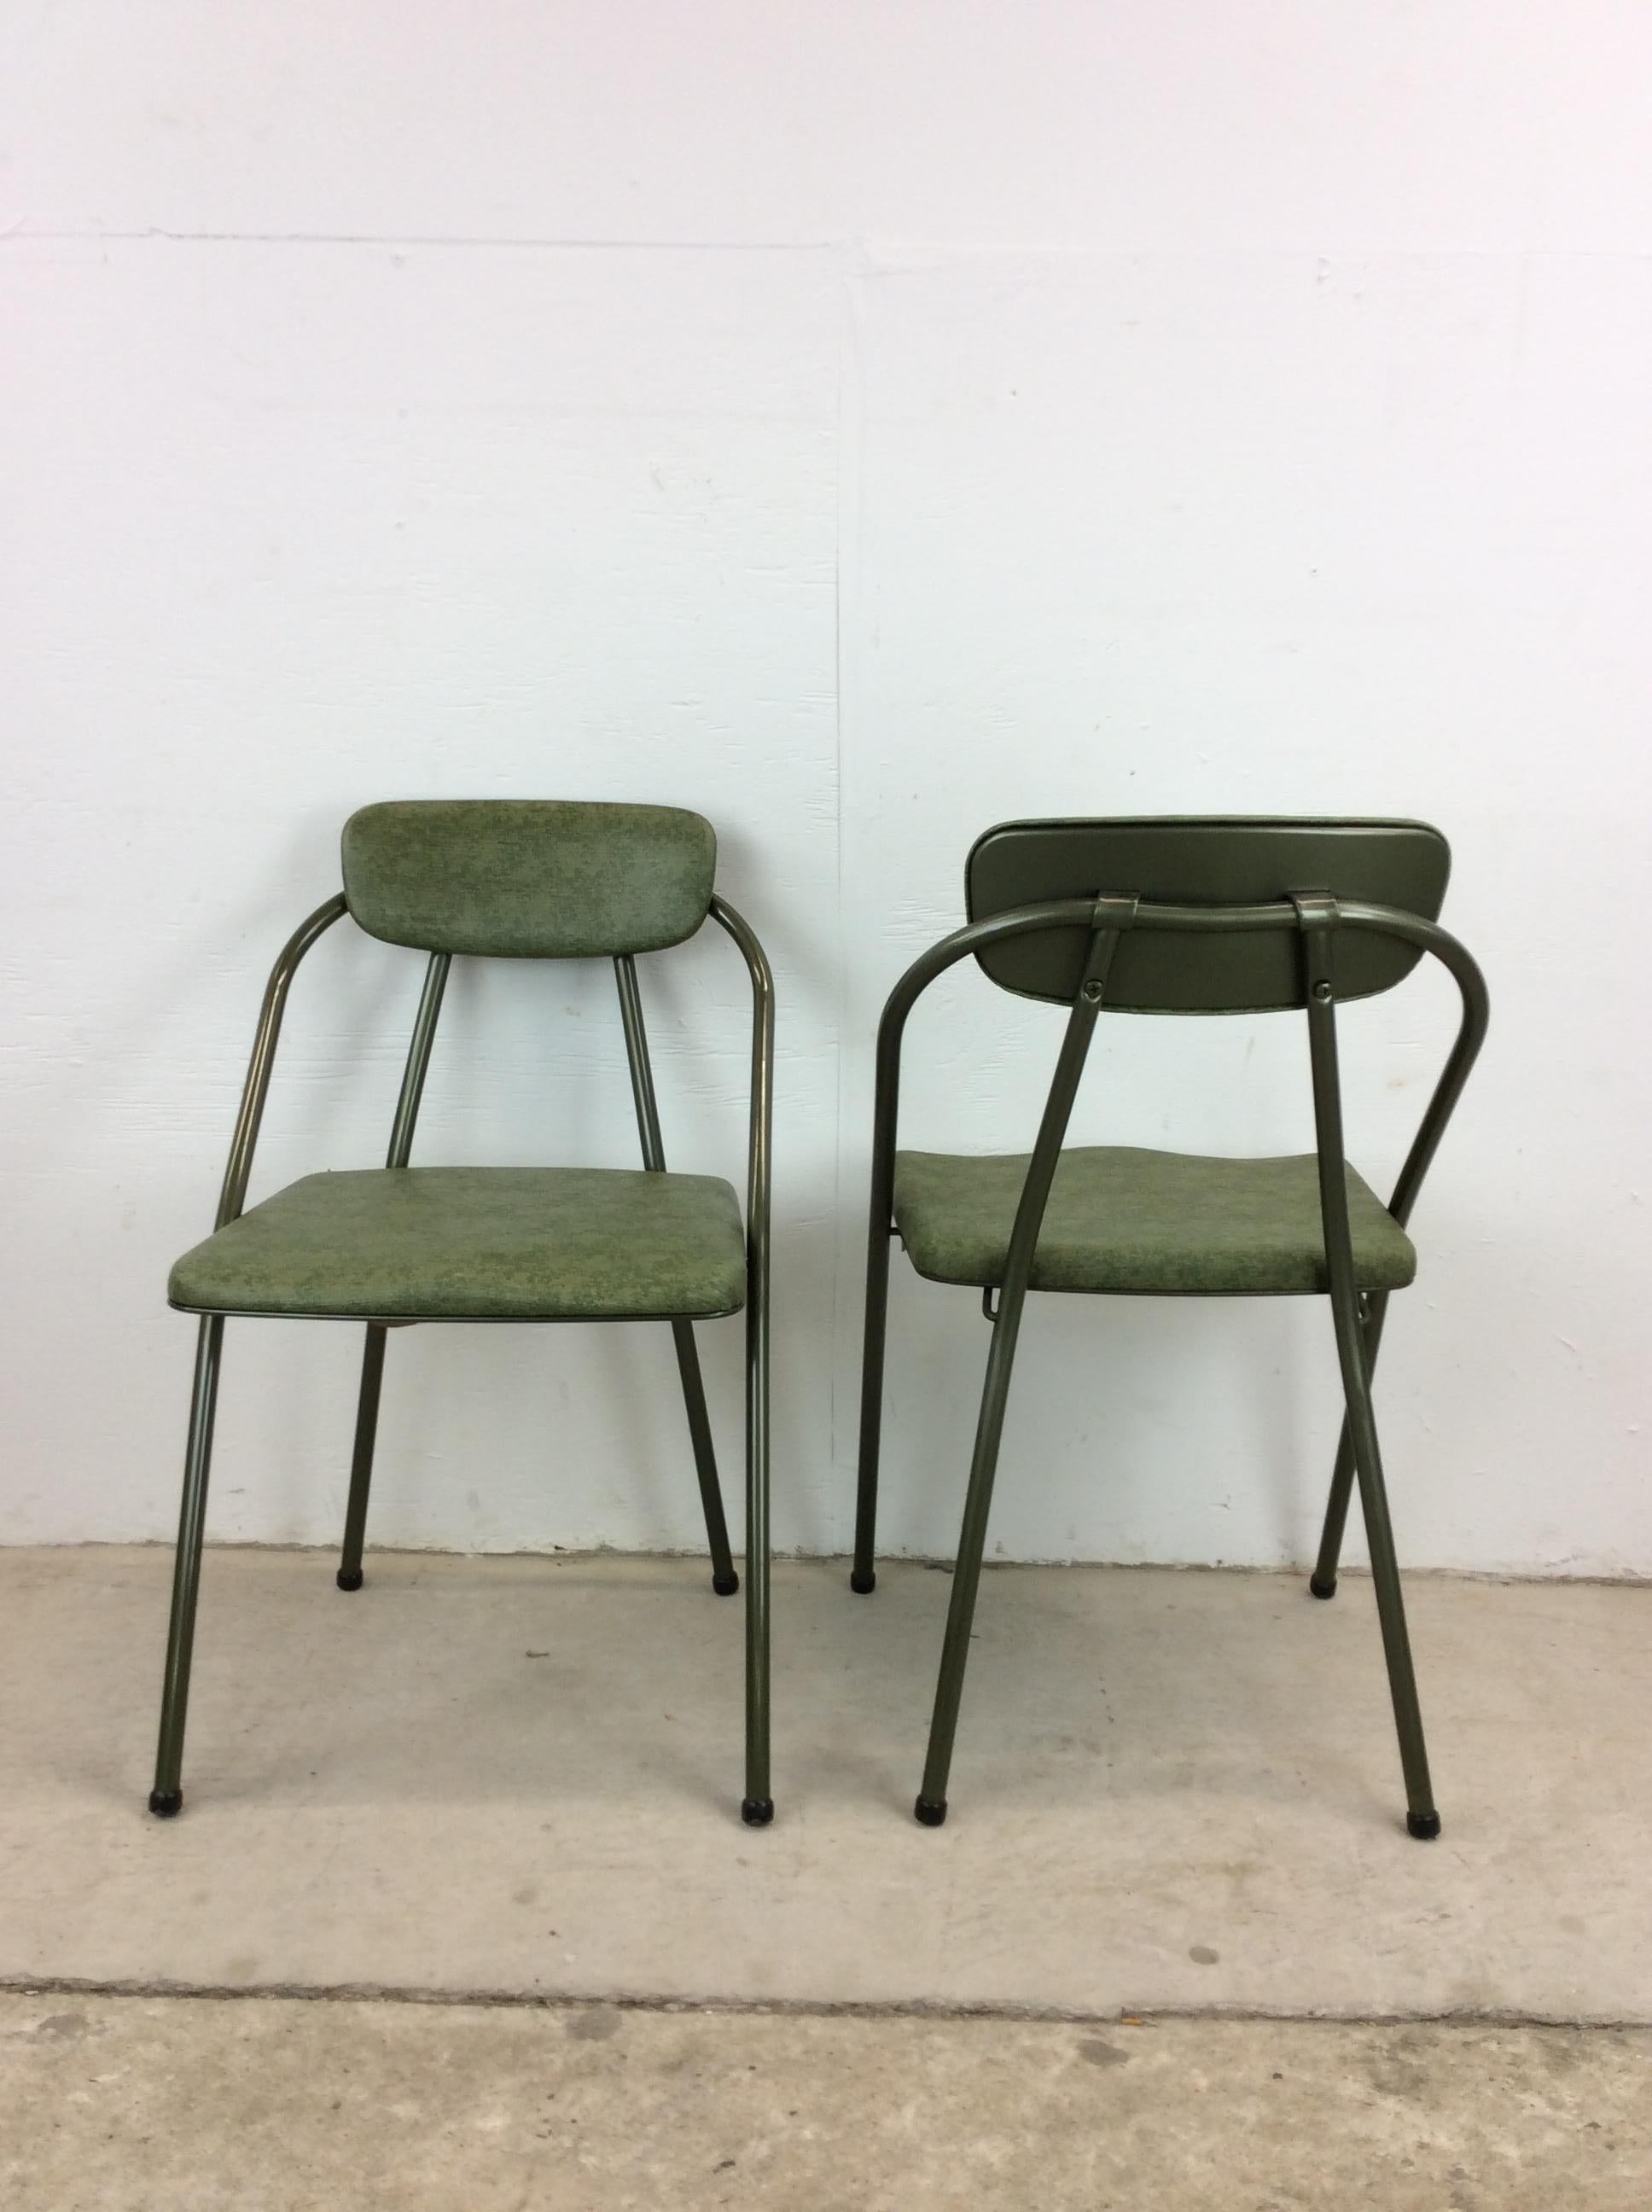 American Mid Century Modern Folding Chairs with Green Vinyl by Cosco For Sale